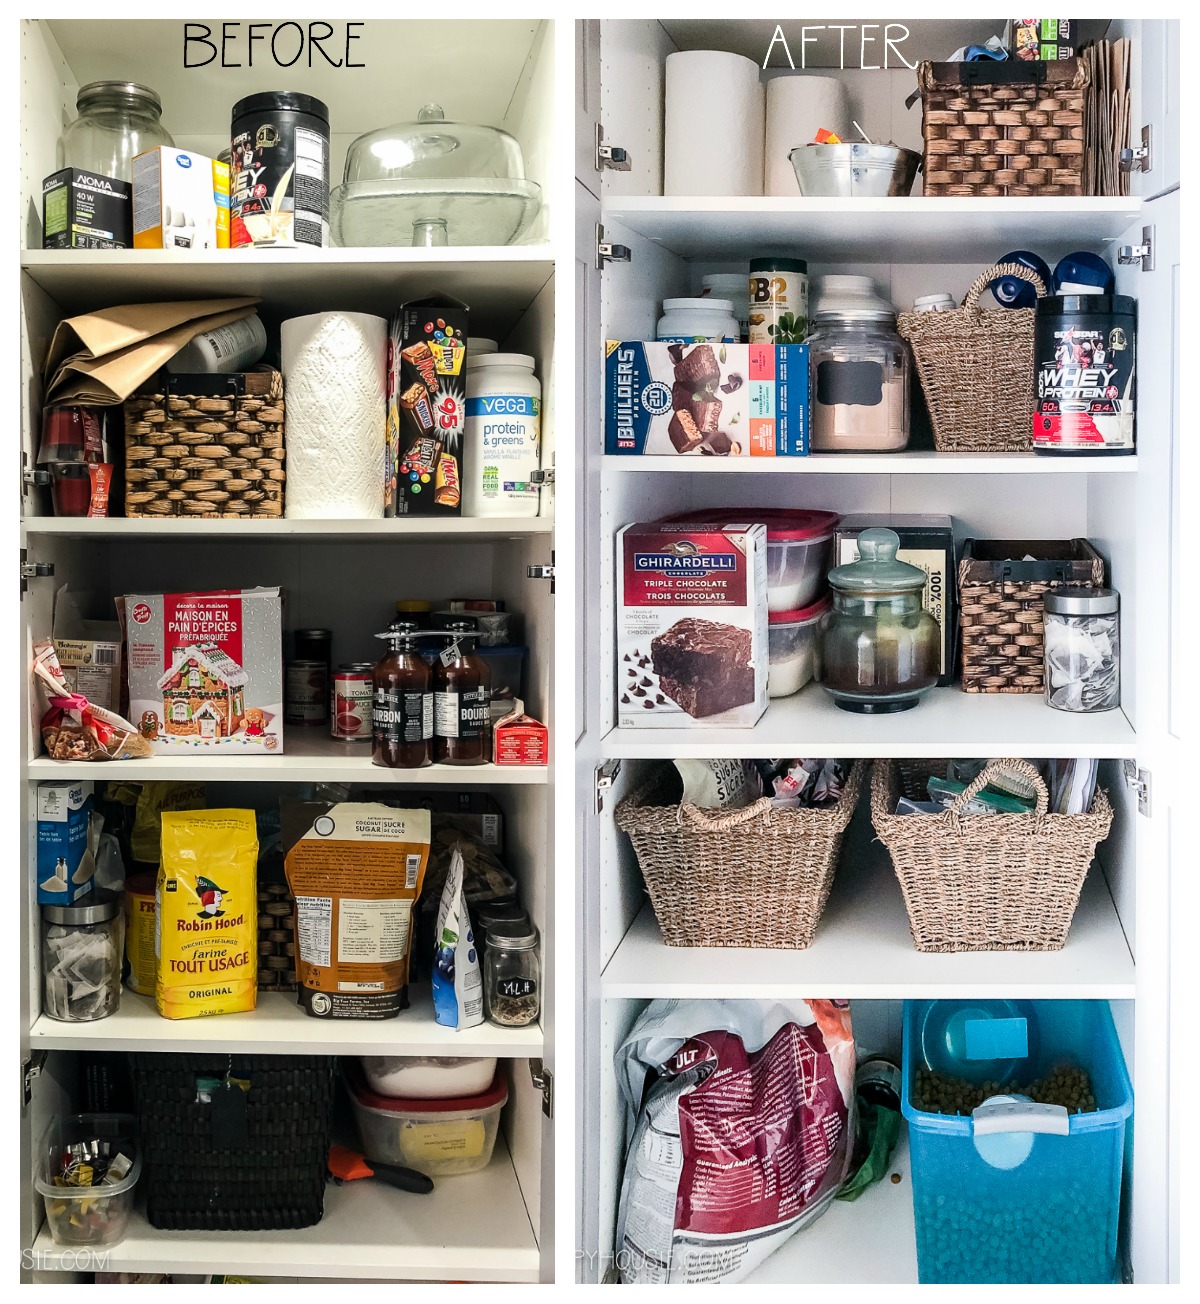 https://www.thehappyhousie.com/wp-content/uploads/2020/01/before-and-after-pantry-organization-how-to-in-three-steps-at-the-happy-housie.jpg